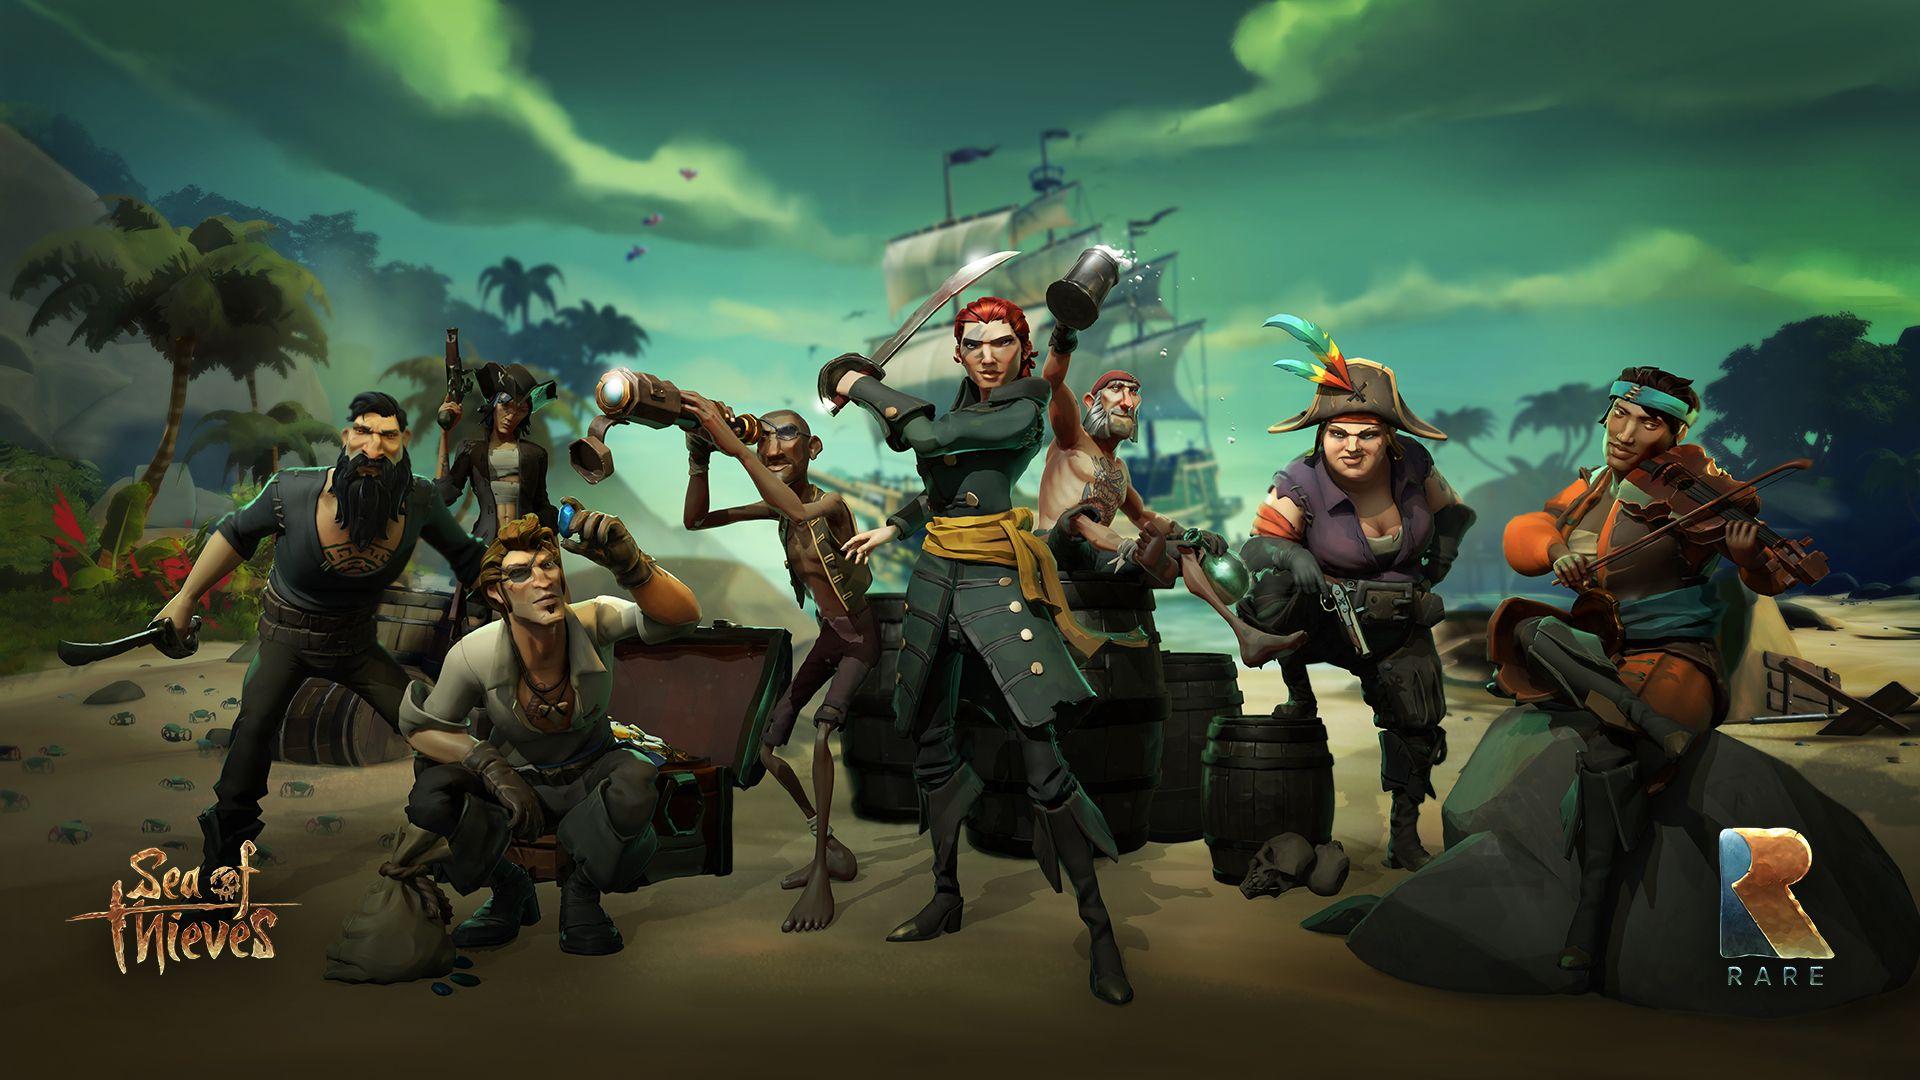 Sea of Thieves – Wallpapers